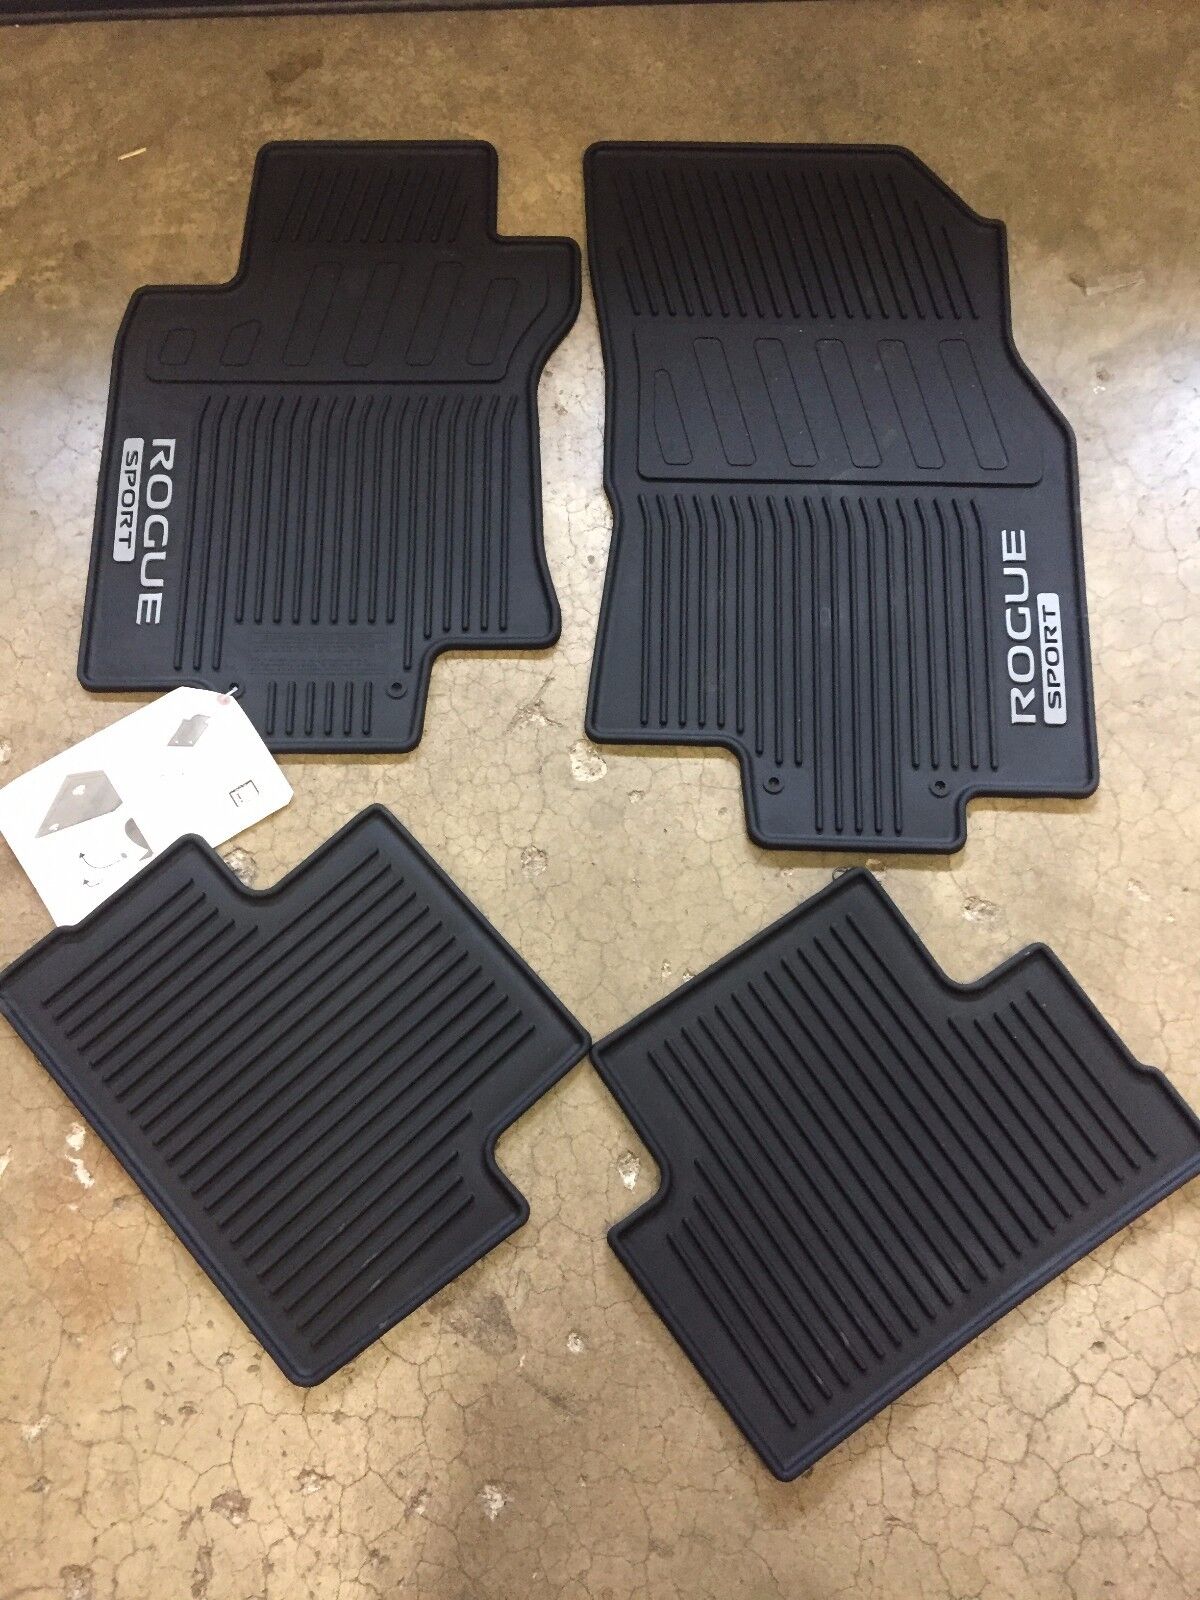 NEW OEM 2017-2020 ROGUE SPORT 4 PC ALL WEATHER RUBBER FLOOR MATS - BLACK